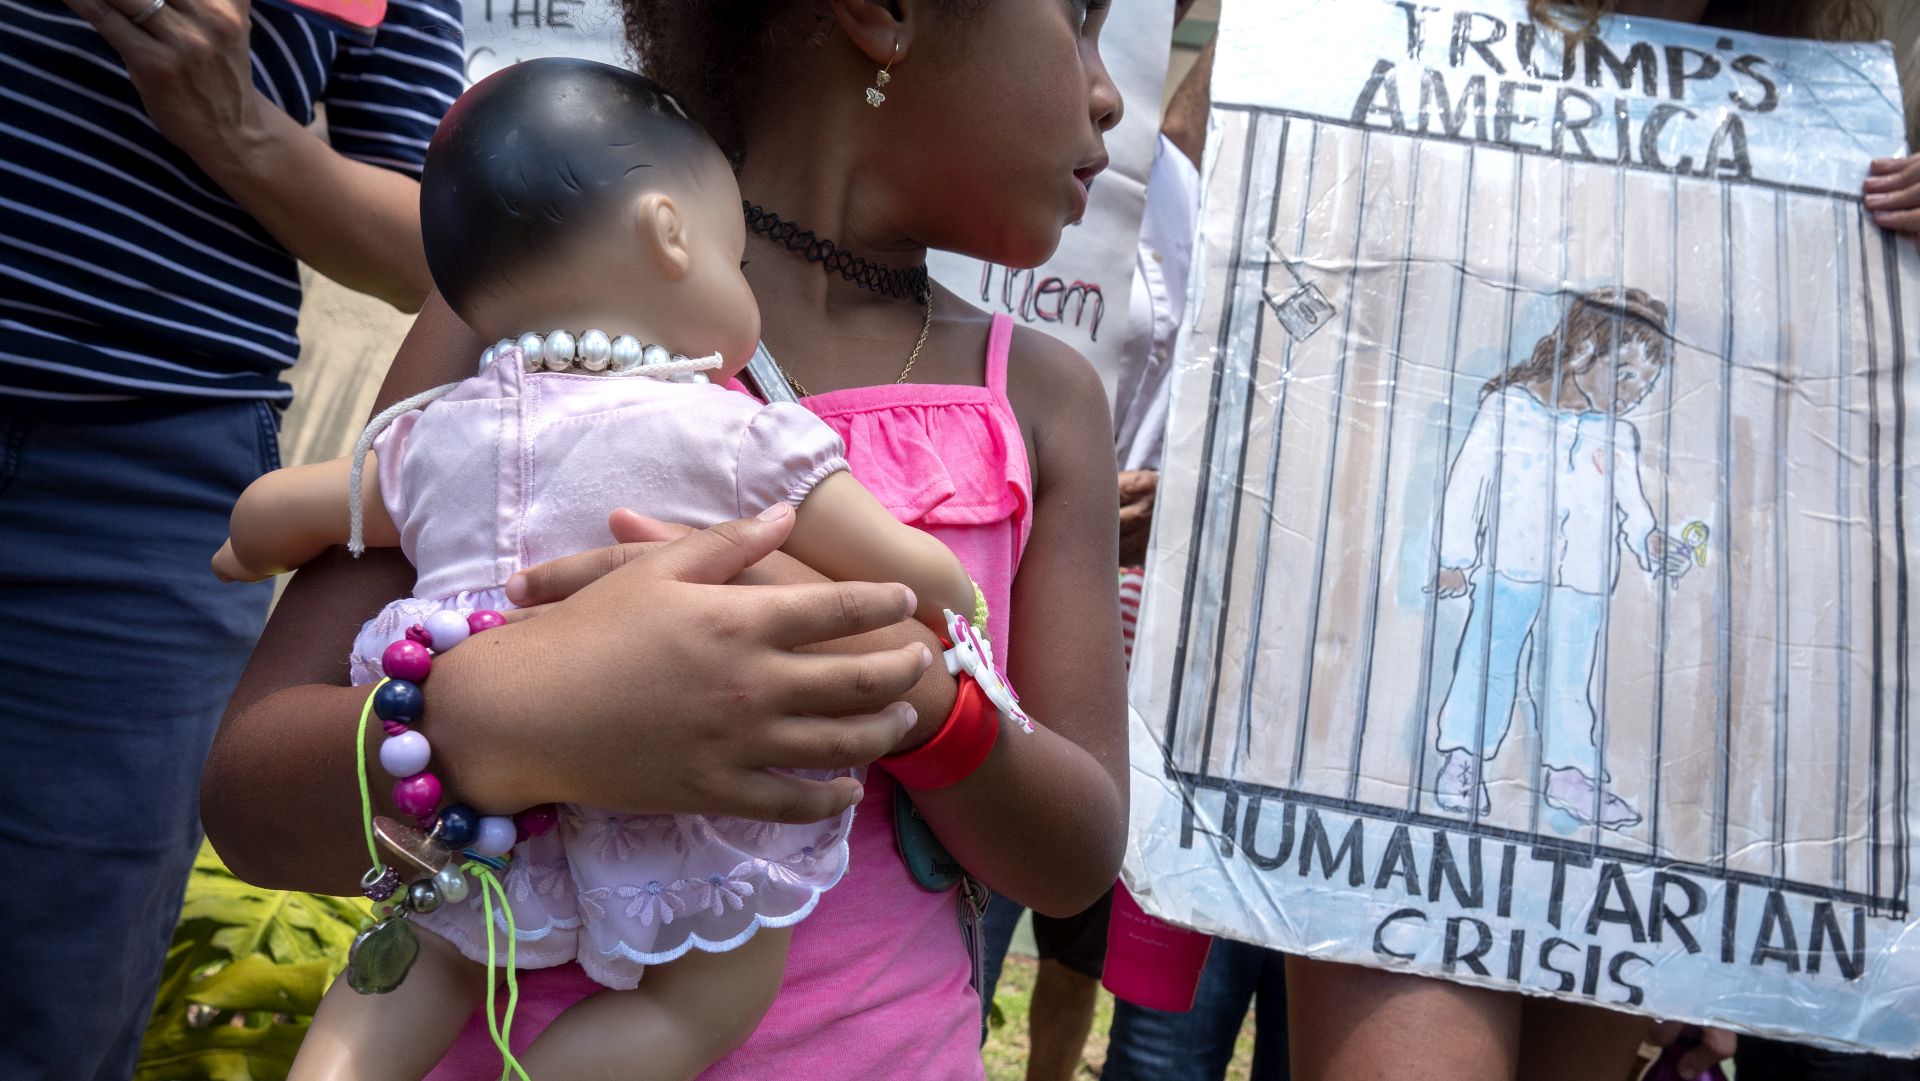 epa07690386 An unidentified girl carries a doll while she stands next to Immigration activists demanding the end of the migrant detention centers in the US, in front of Senator Marco Rubio's office building in Miami, Florida, USA, 02 July 2019. Over 170 demonstrations named #CloseTheCamps are taking place across the country, including cities like Miami, New York, Los Angeles and in border communities.  EPA/CRISTOBAL HERRERA